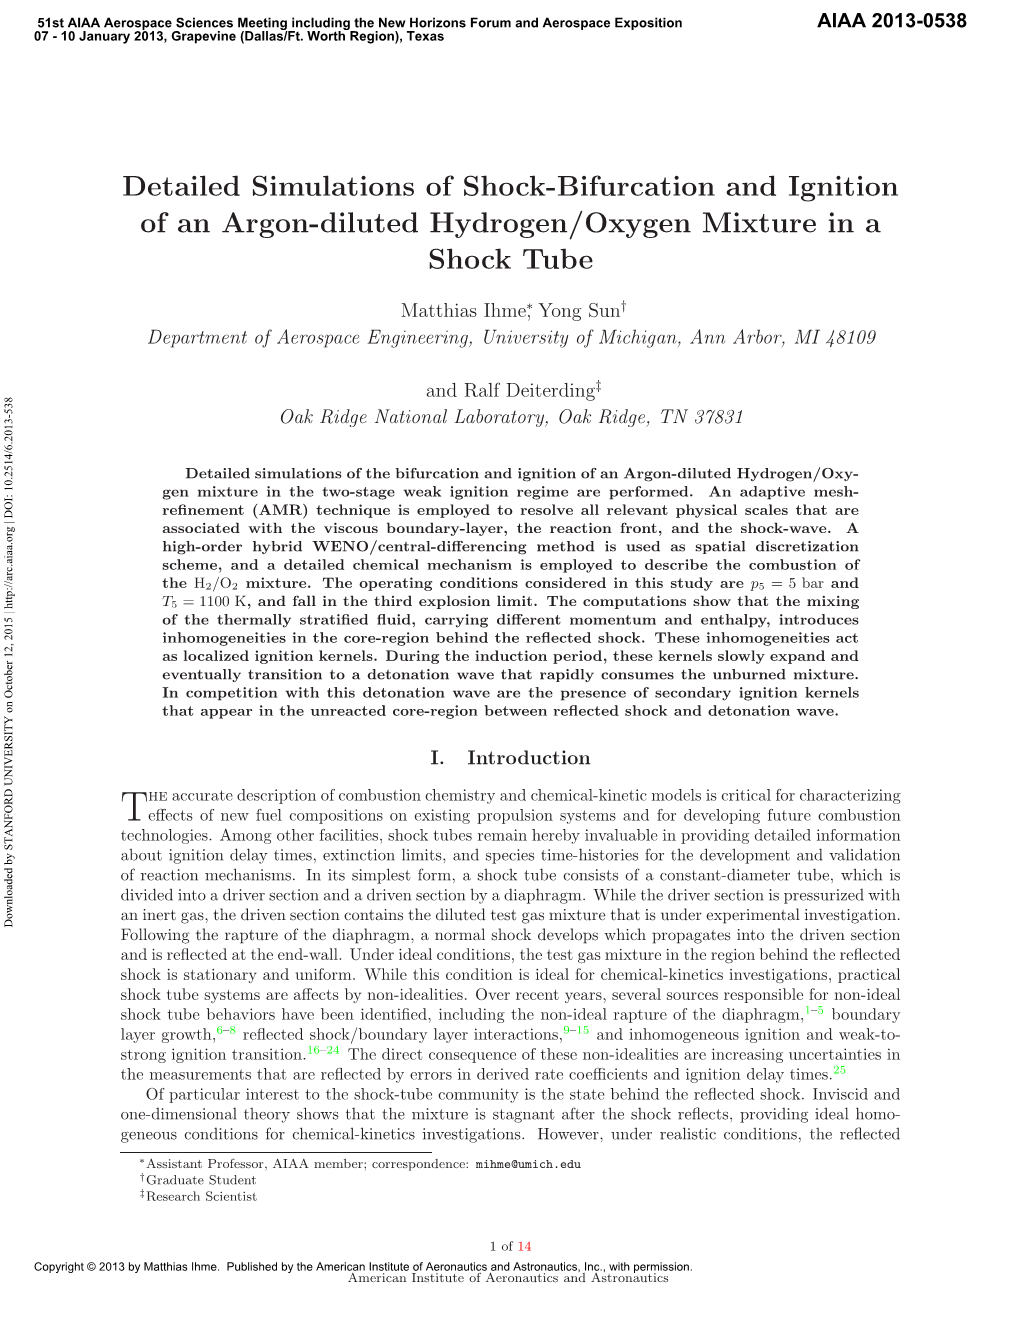 Detailed Simulations of Shock-Bifurcation and Ignition of an Argon-Diluted Hydrogen/Oxygen Mixture in a Shock Tube